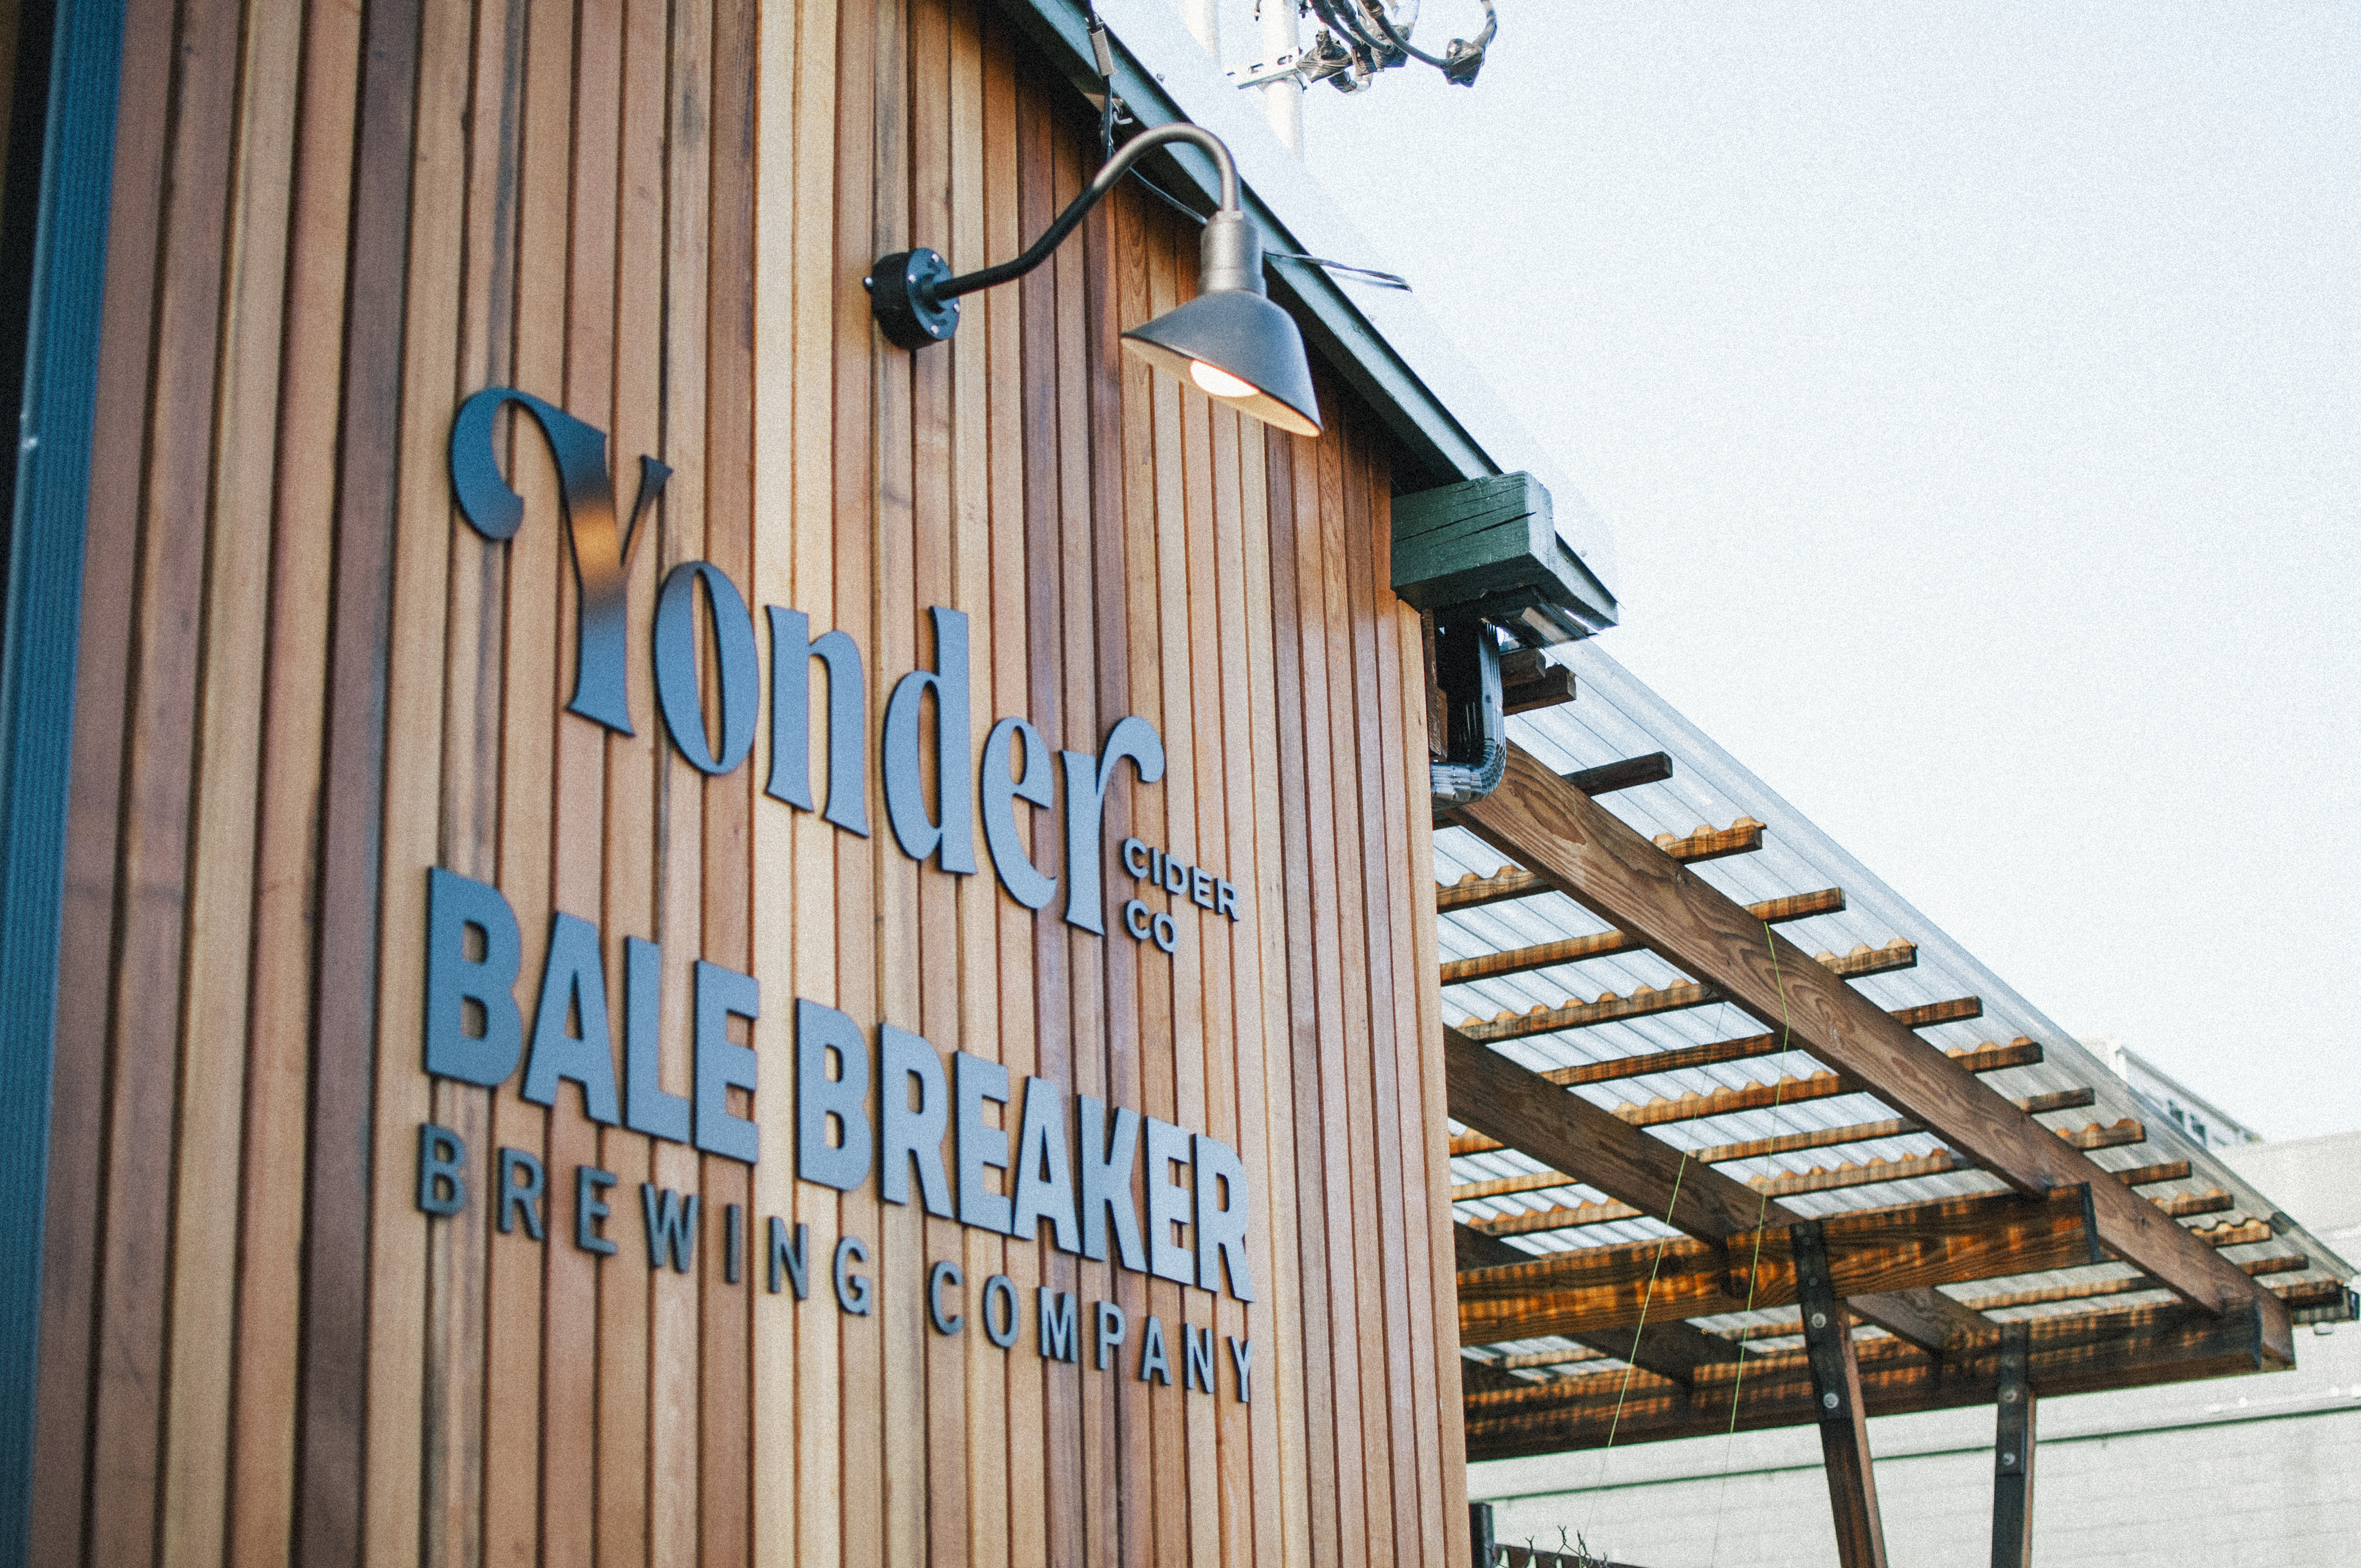 The wood facade of Bale Breaker and Yonder taproom. there’s a covered overhang to the right of the main sign displaying the name of each business.